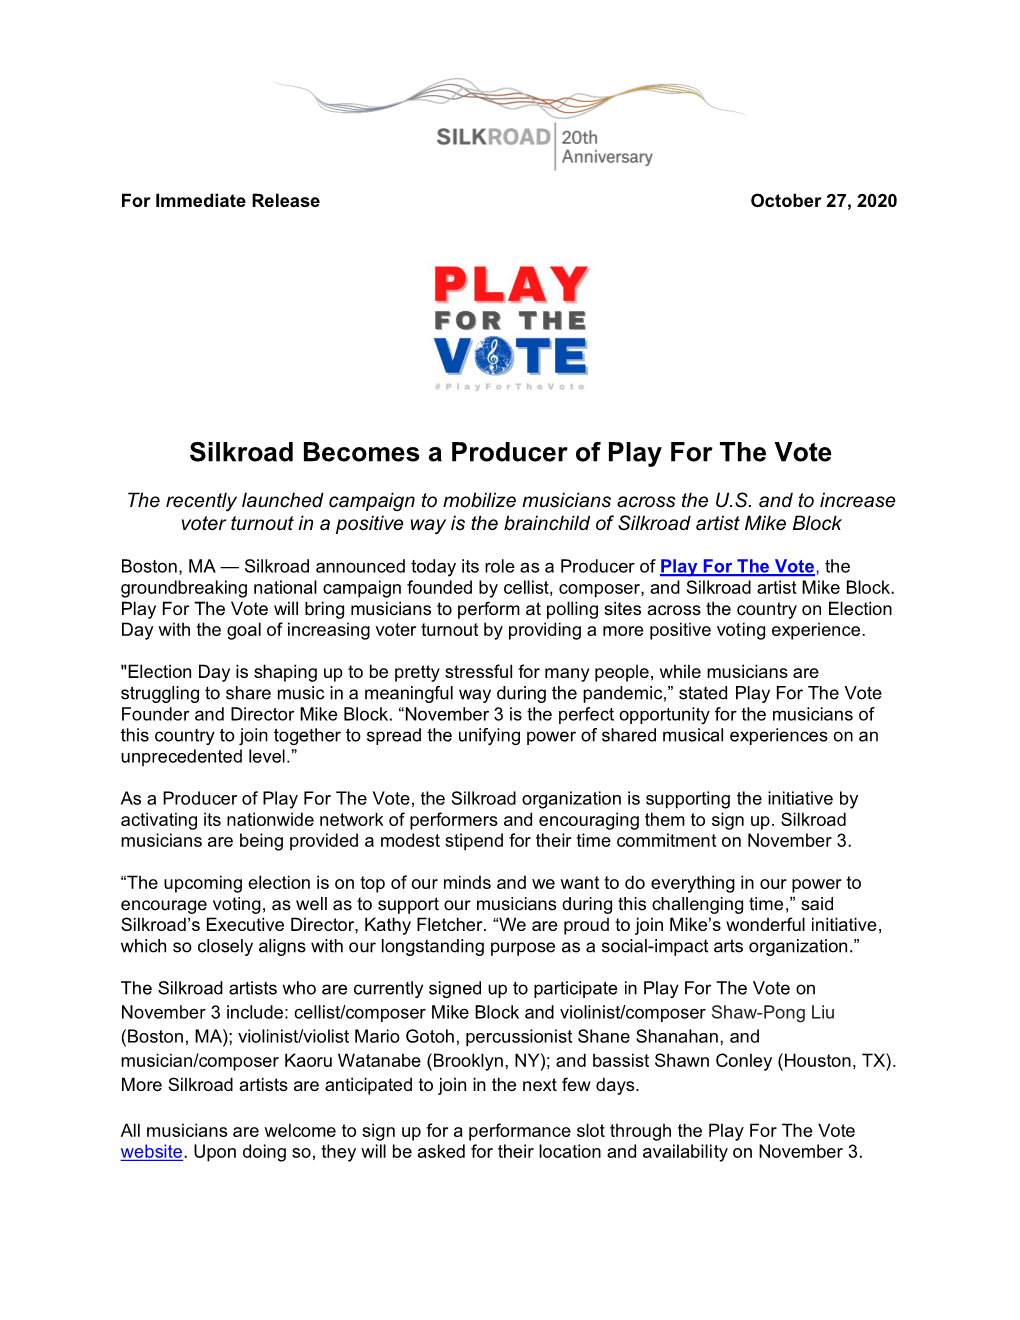 Silkroad Becomes a Producer of Play for the Vote